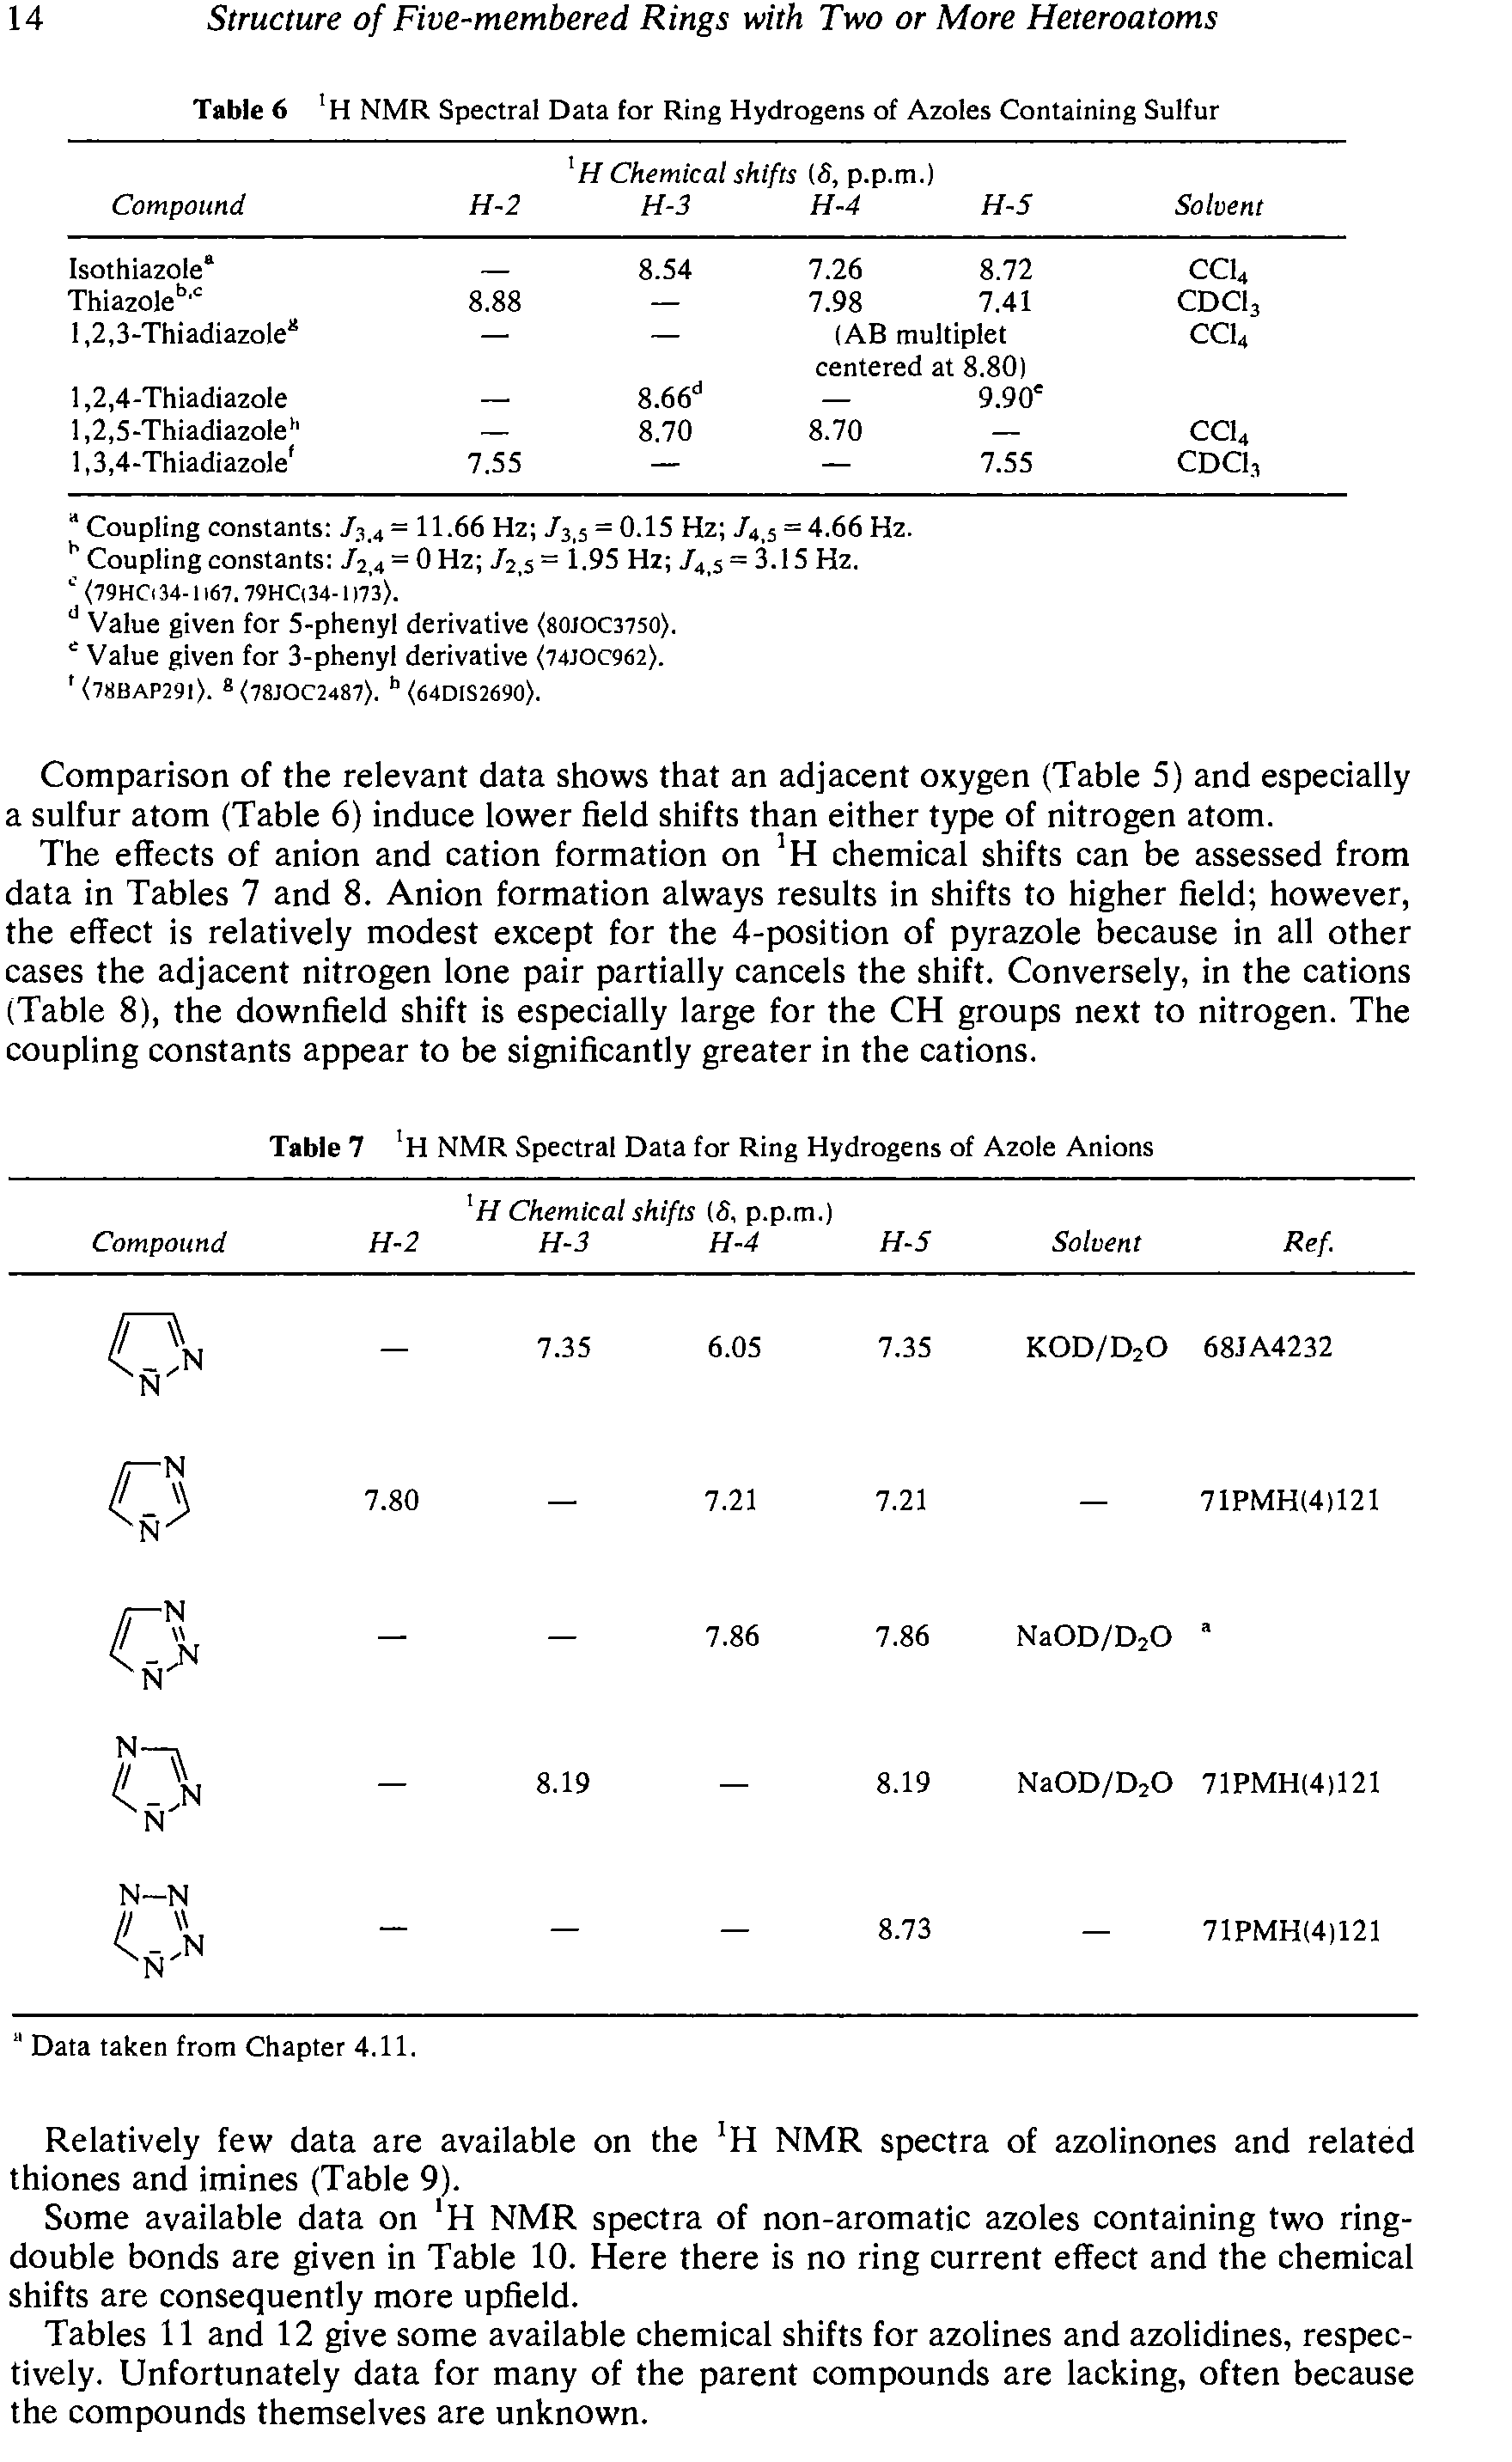 Tables 11 and 12 give some available chemical shifts for azolines and azolidines, respectively. Unfortunately data for many of the parent compounds are lacking, often because the compounds themselves are unknown.